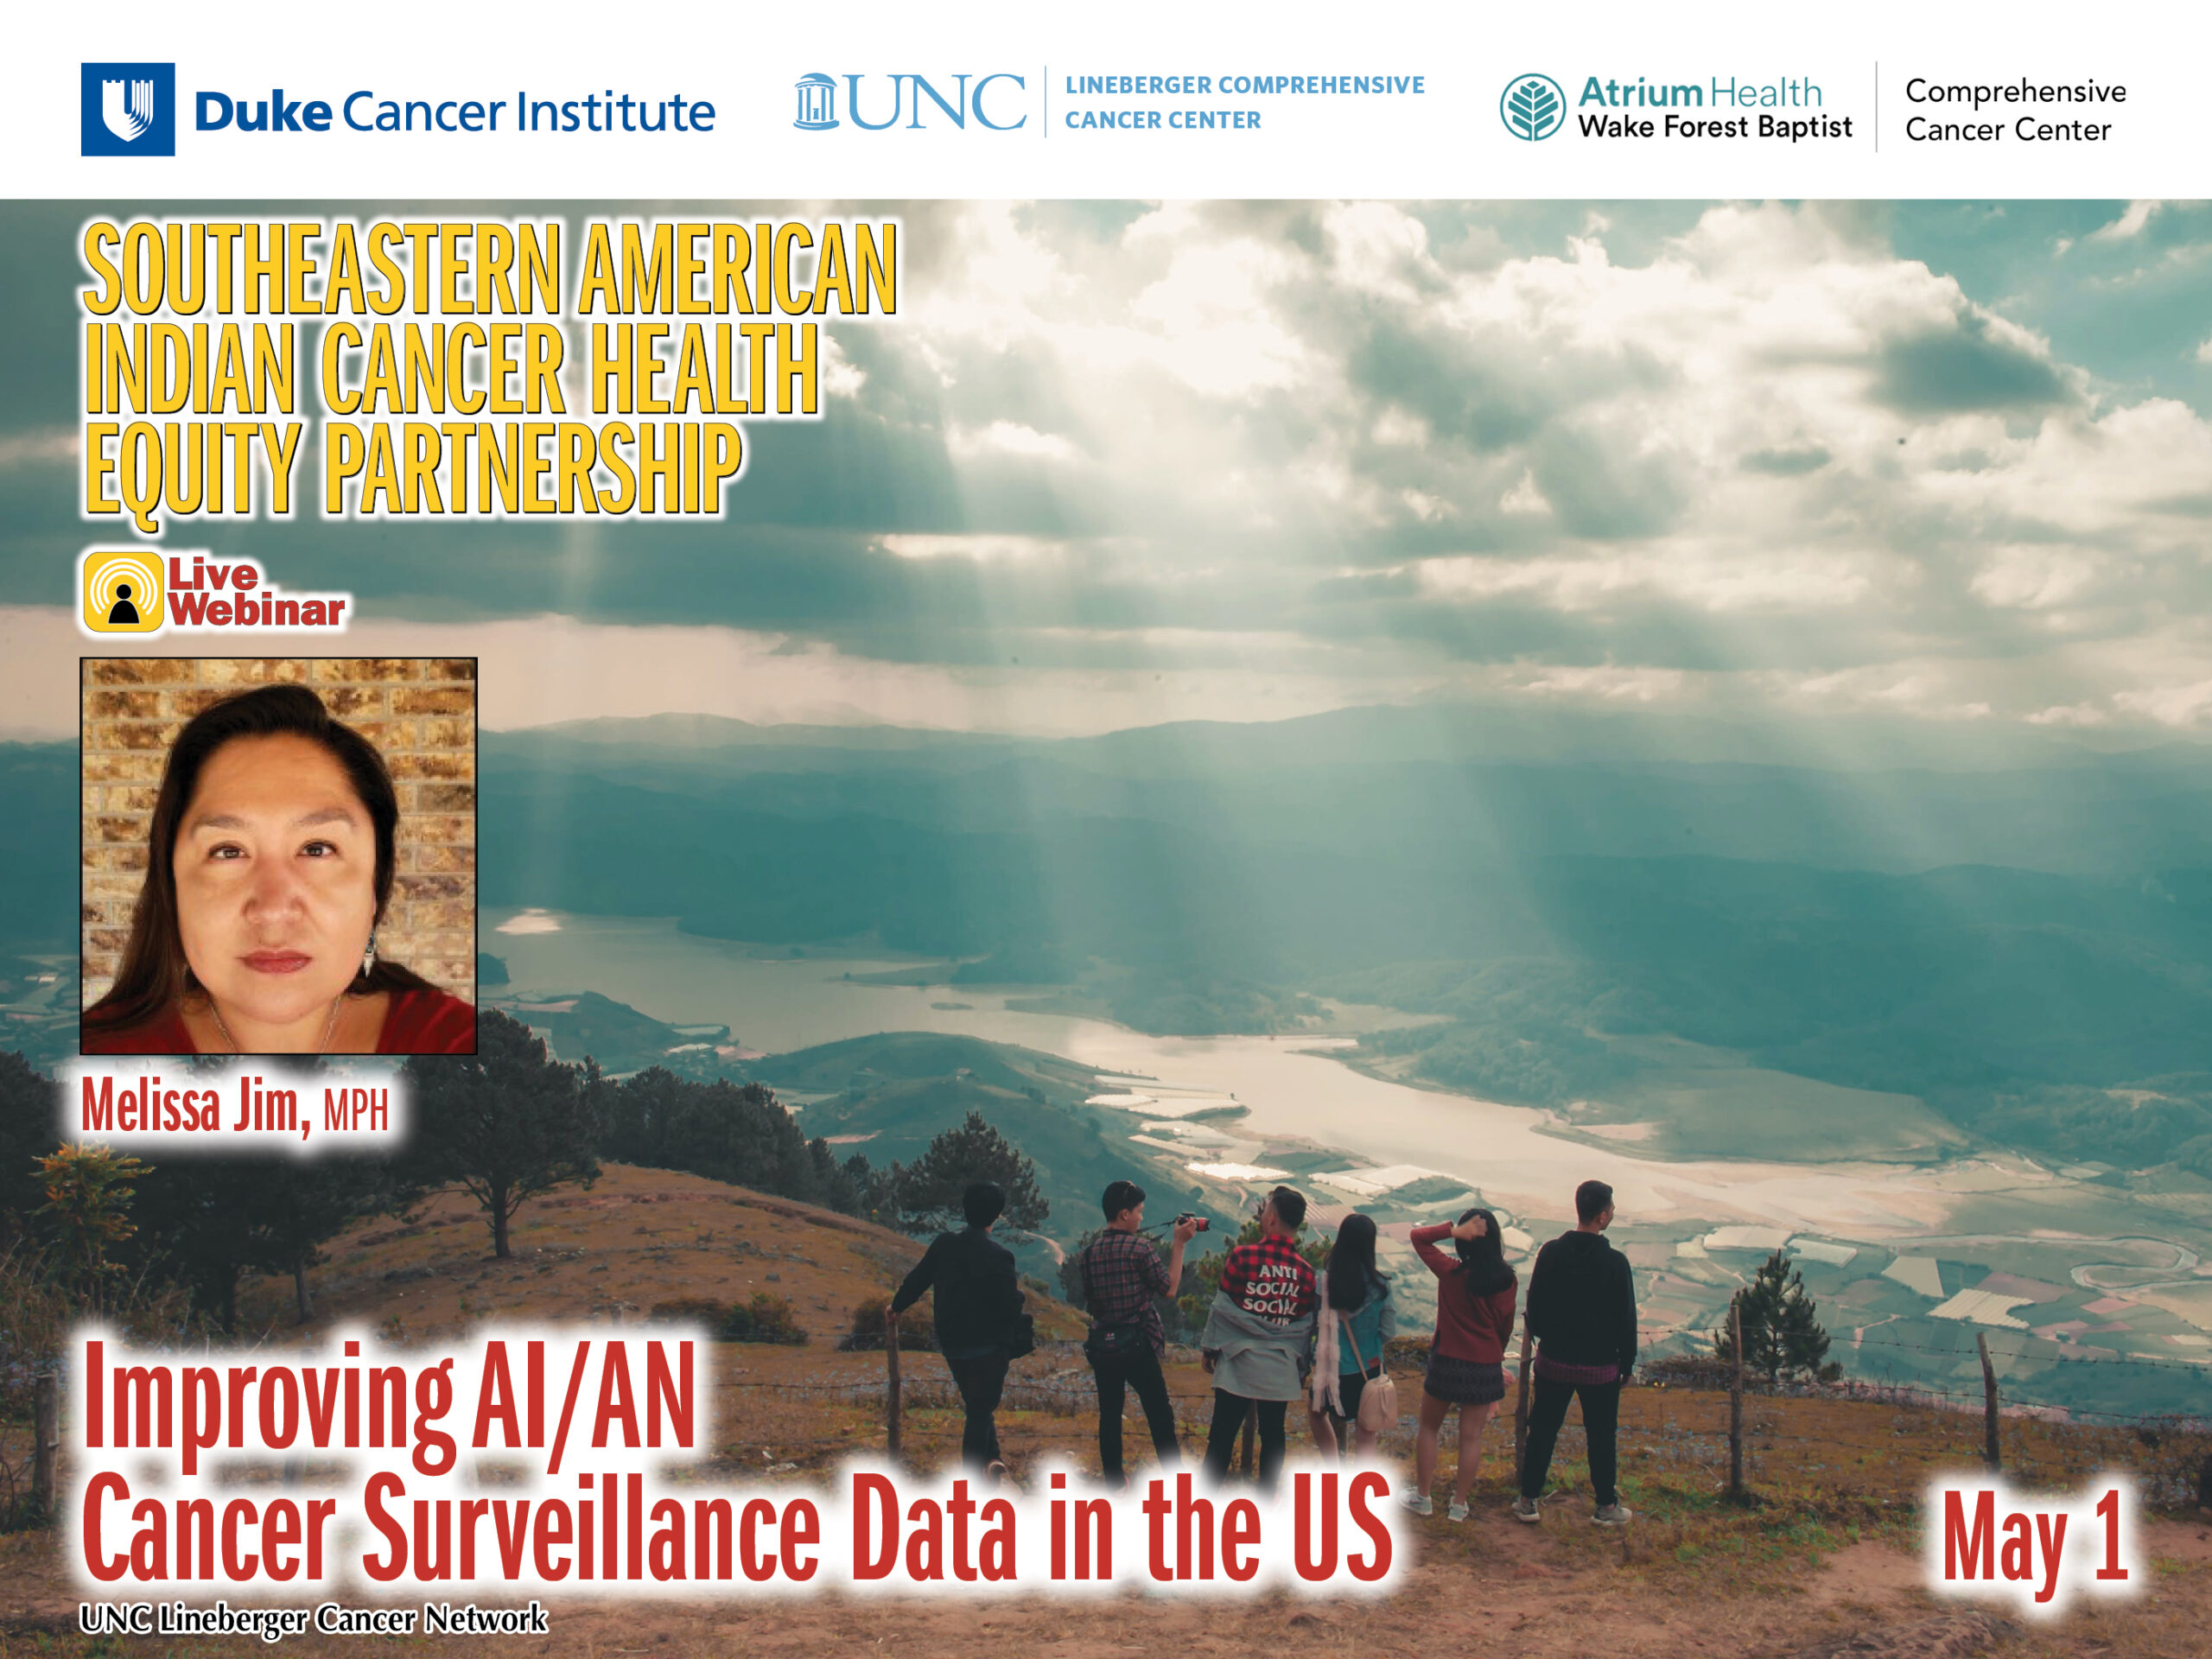 Improving AI/AN Cancer Surveillance Data in the US